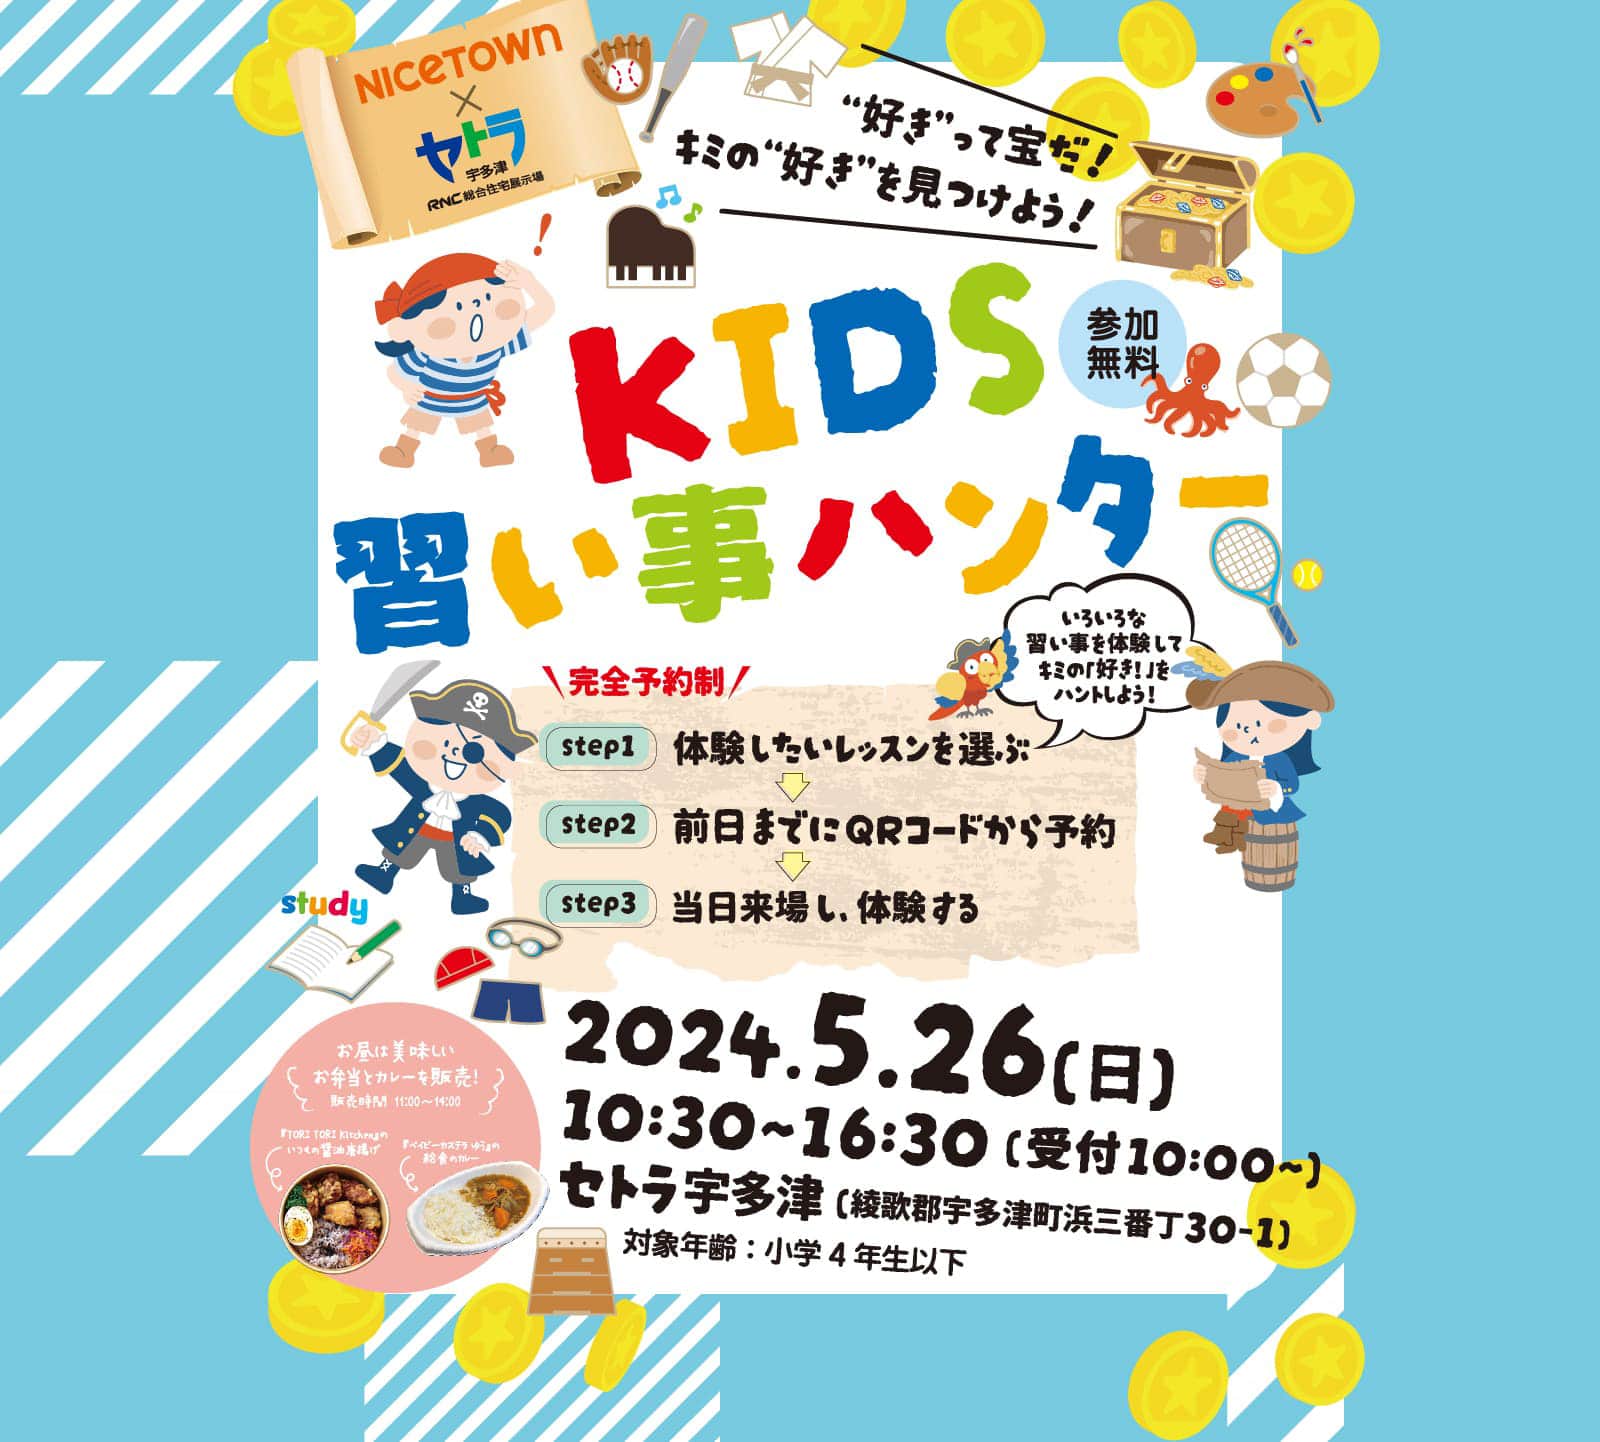 KIDS習い事ハンター 2024年5月26日 10:30〜16:30（受付10:00〜）